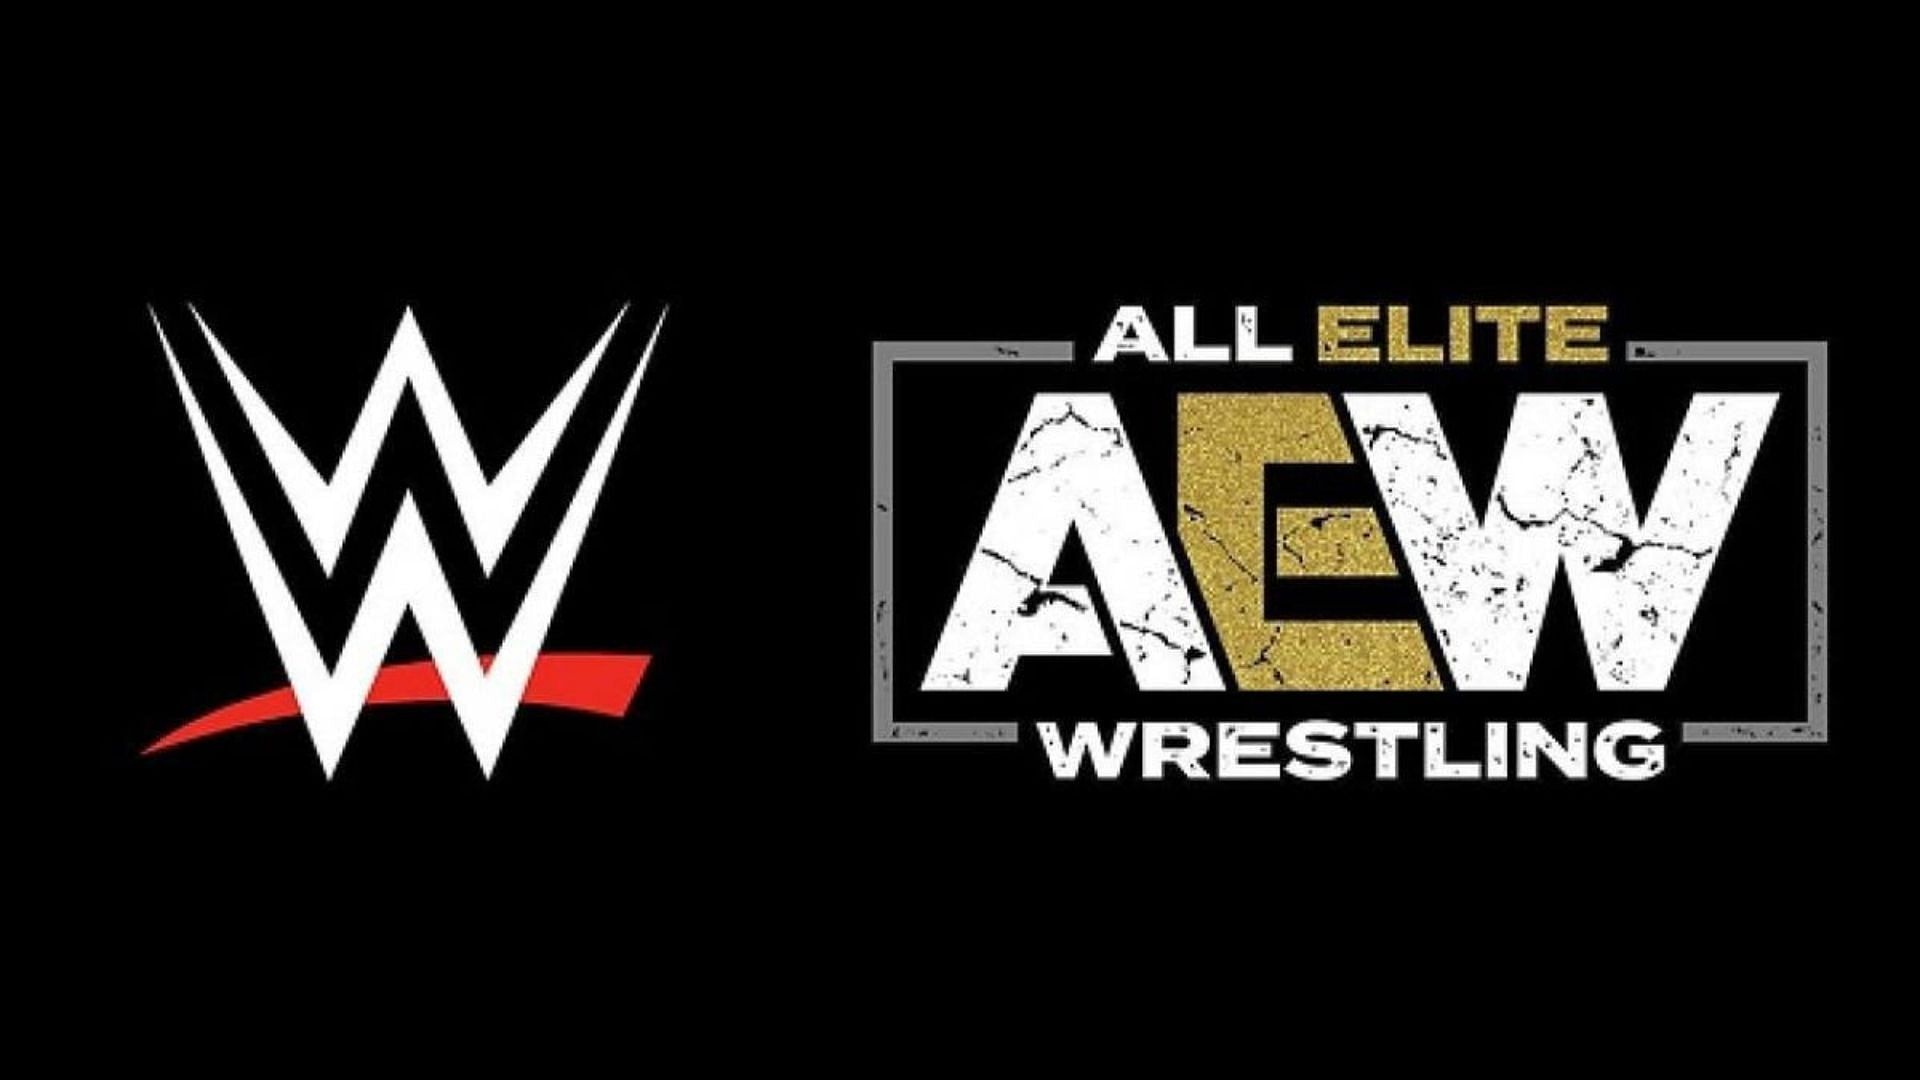 Many former WWE Stars have made the move to AEW.